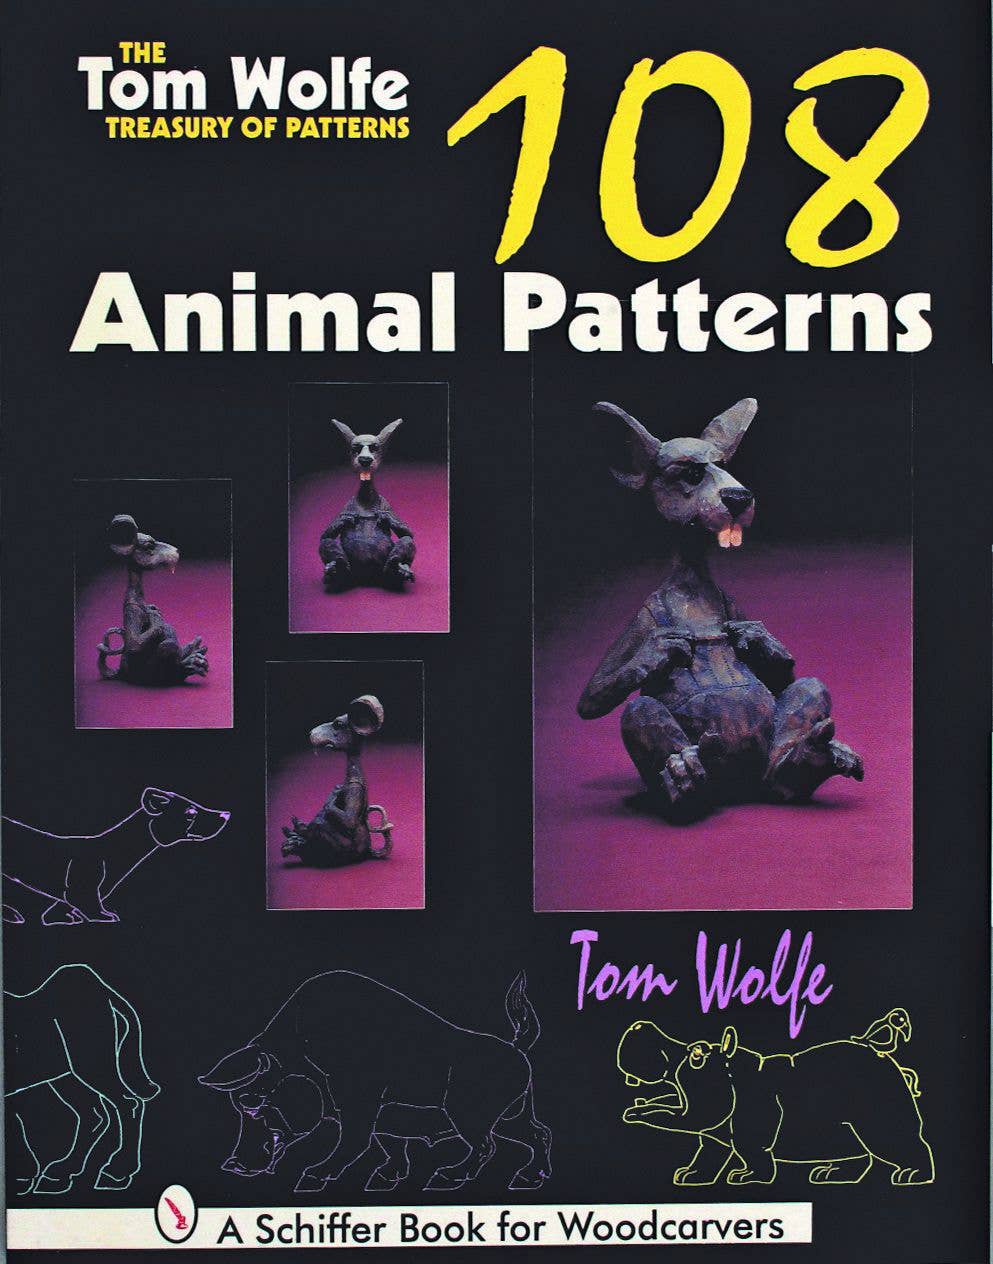 The Tom Wolfe Treasury of Patterns